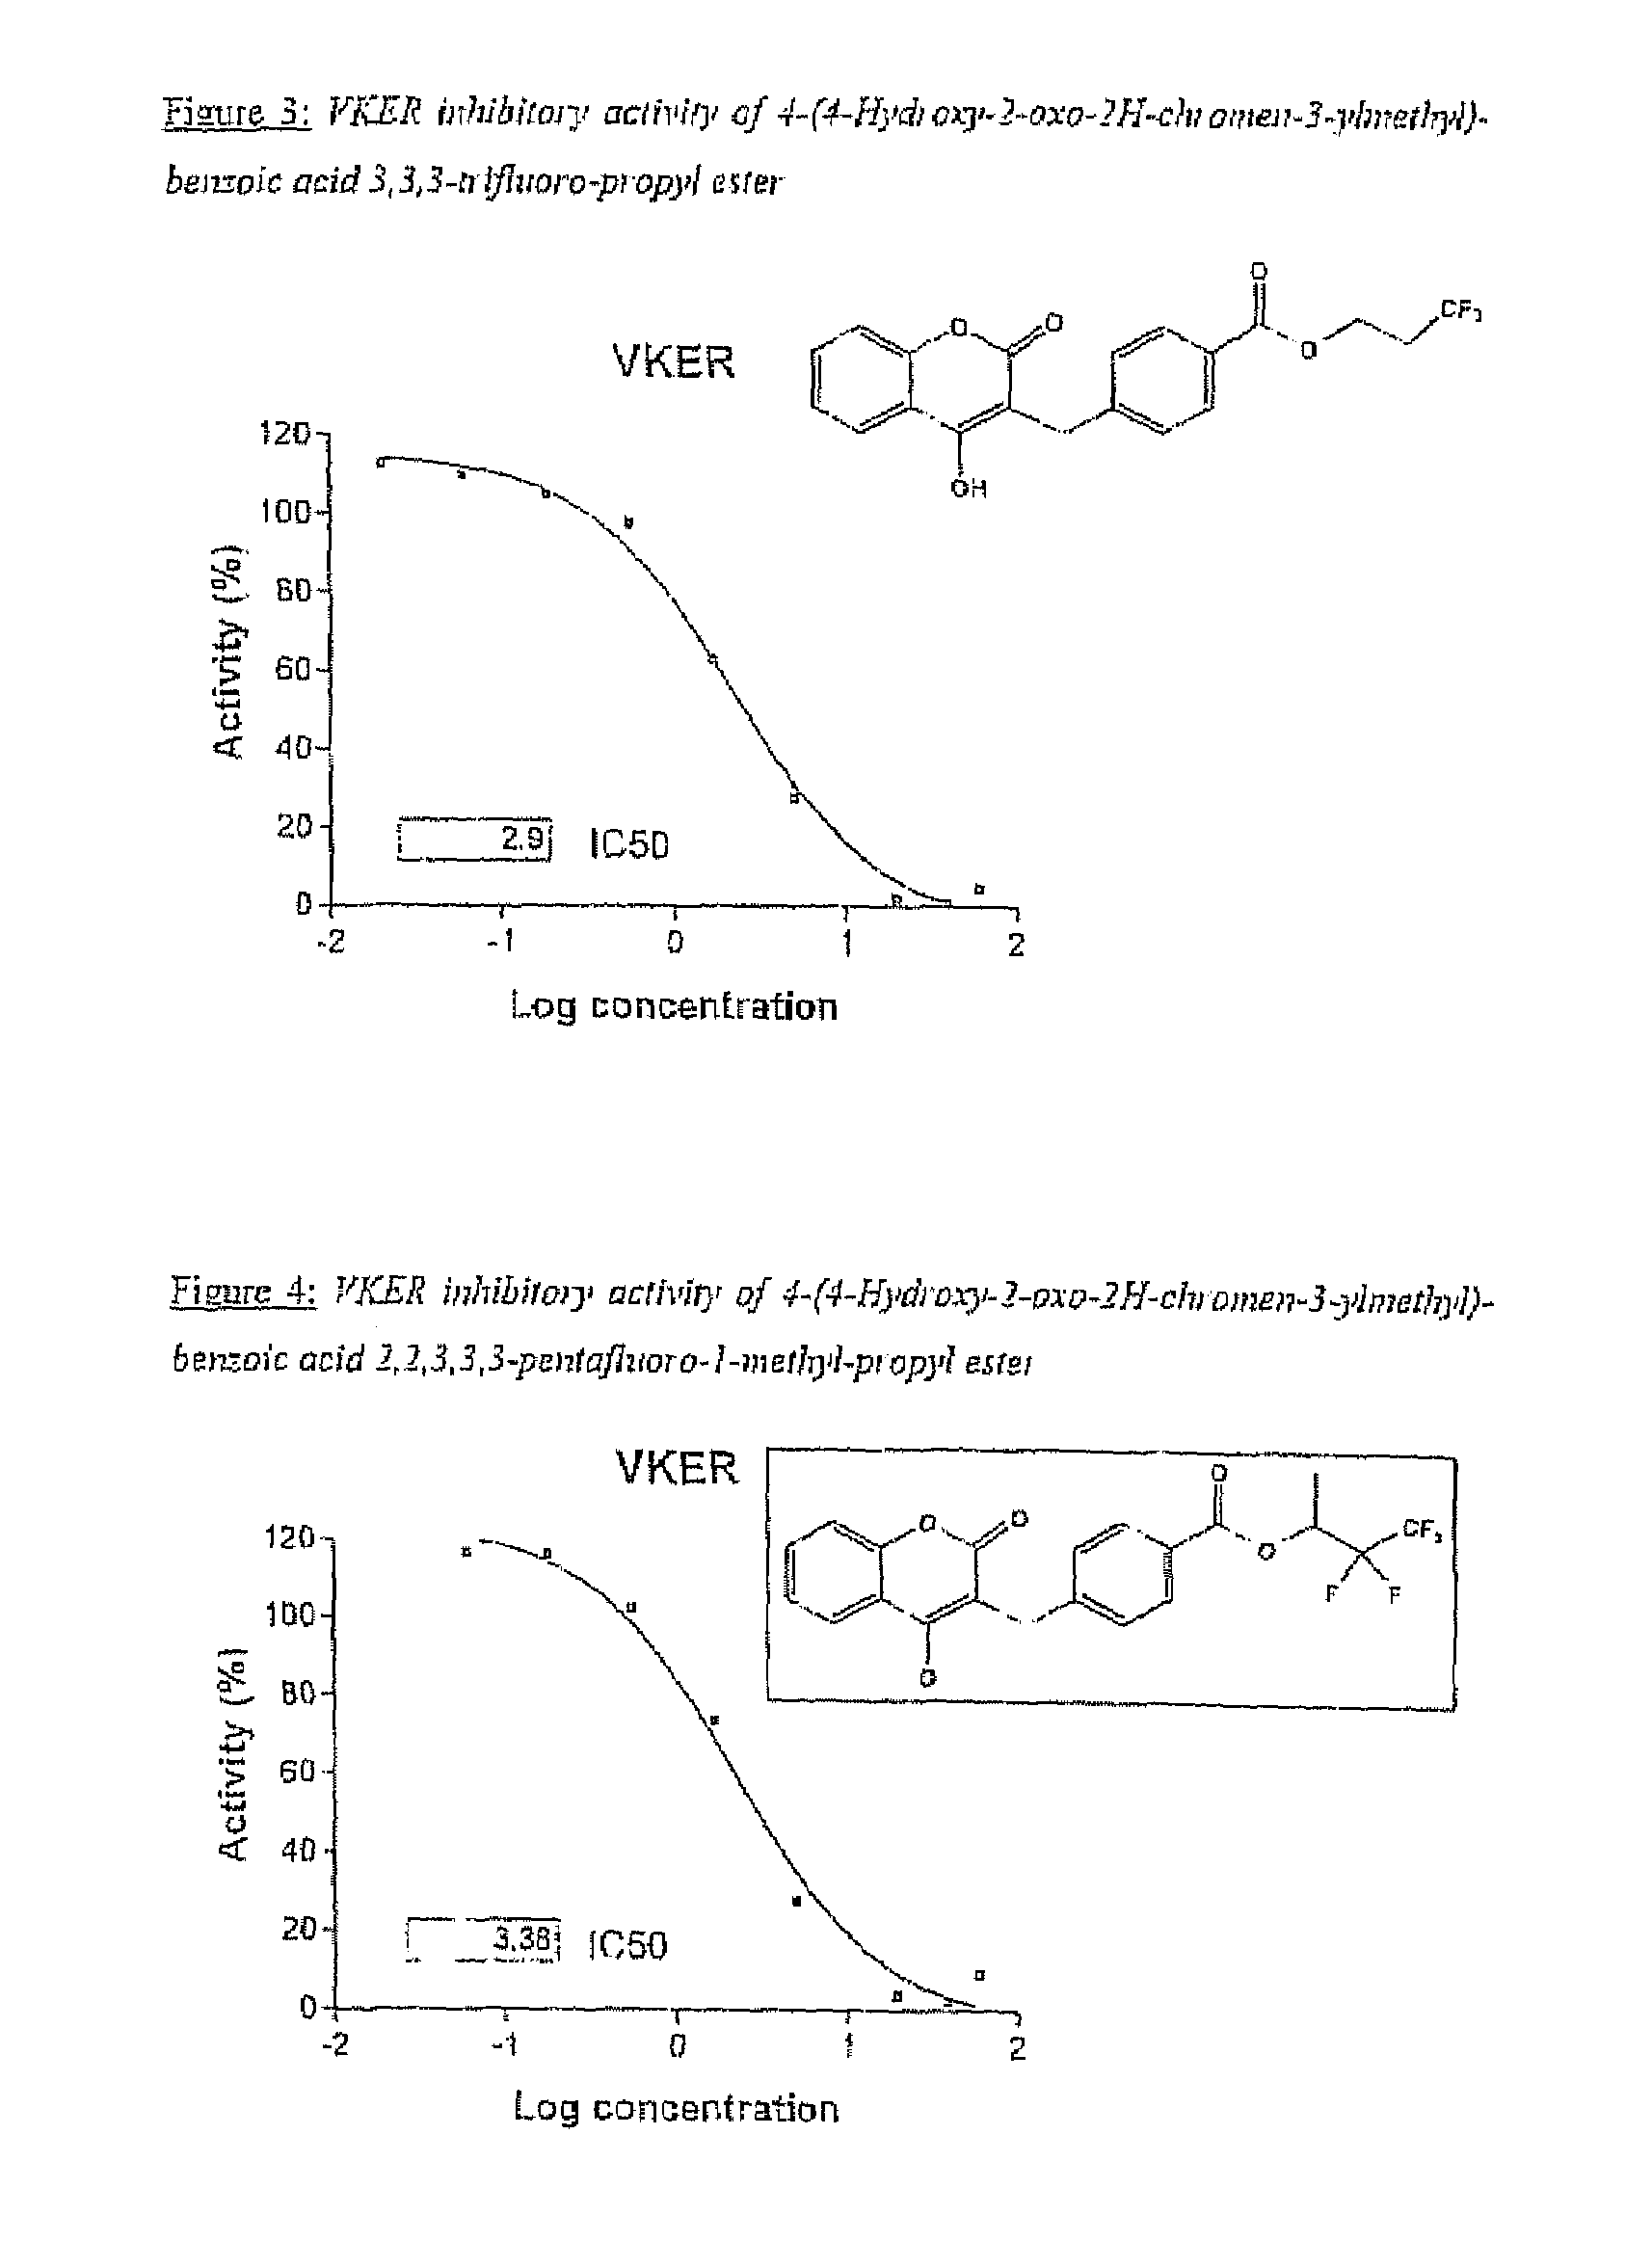 Materials and methods for treating coagulation disorders